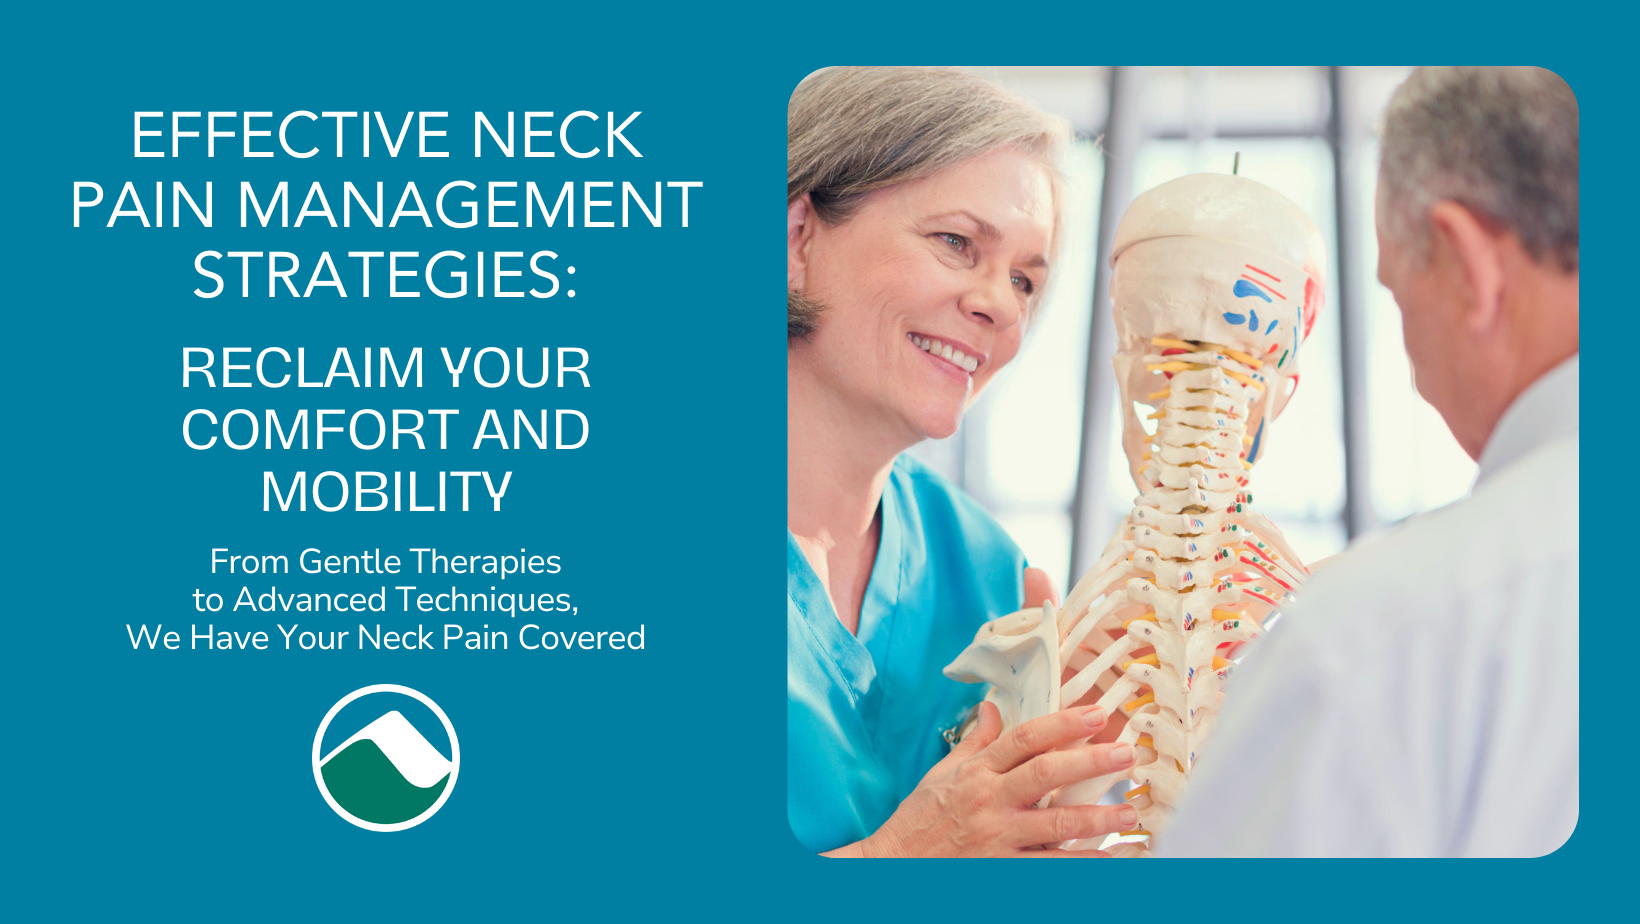 A promotional image with a teal background featuring the text: "Effective Neck Pain Management Strategies: Reclaim Your Comfort and Mobility. From Gentle Therapies to Advanced Techniques, We Have Your Neck Pain Covered." On the right, a smiling female healthcare professional is holding a spine model, demonstrating something to a patient.